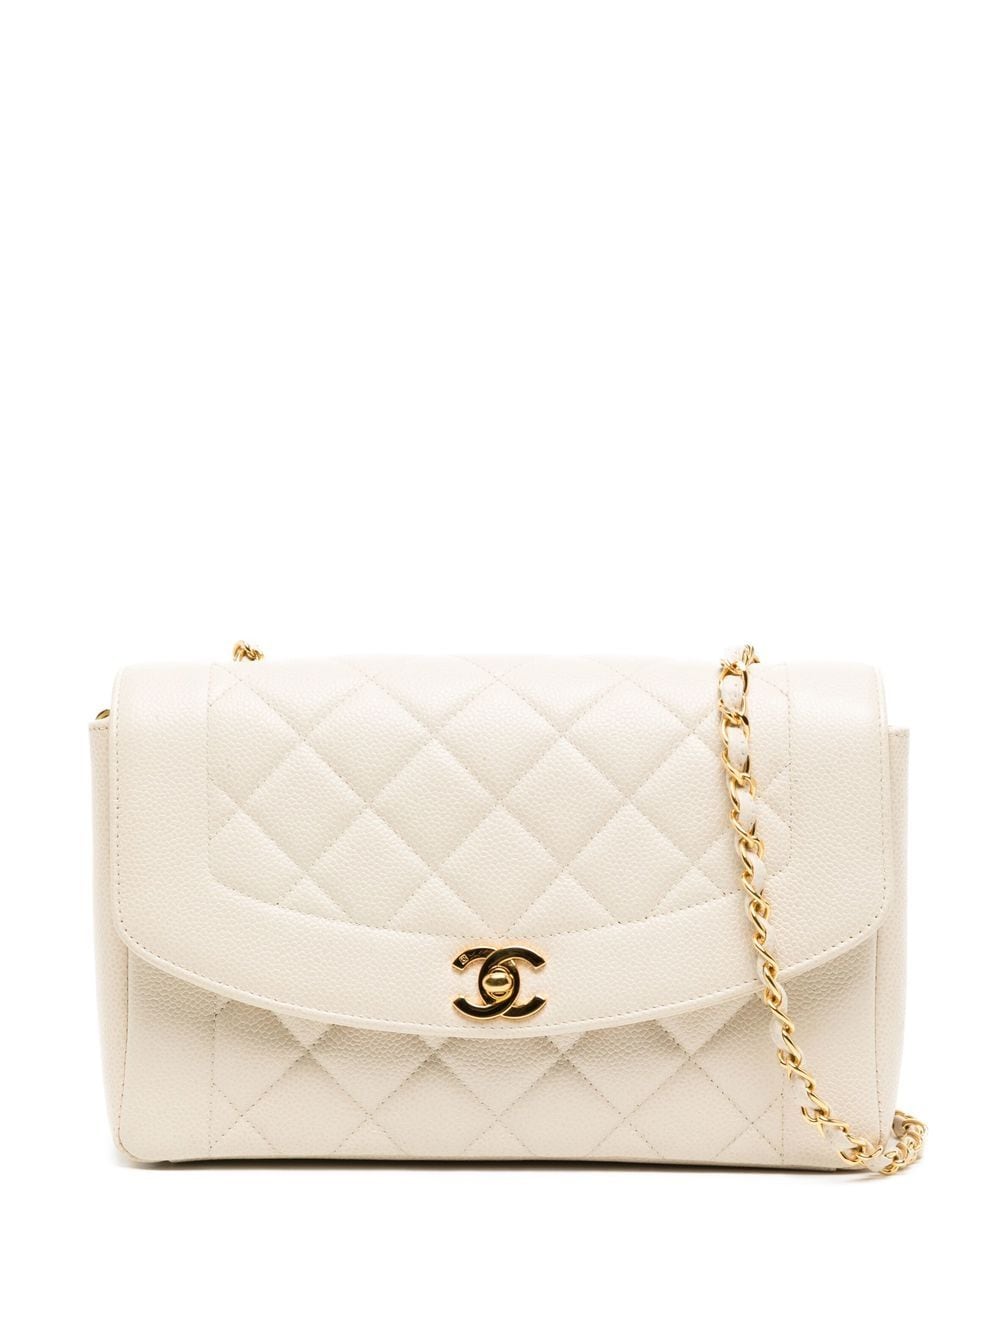 CHANEL Pre-Owned 1997 medium Diana shoulder bag - White von CHANEL Pre-Owned